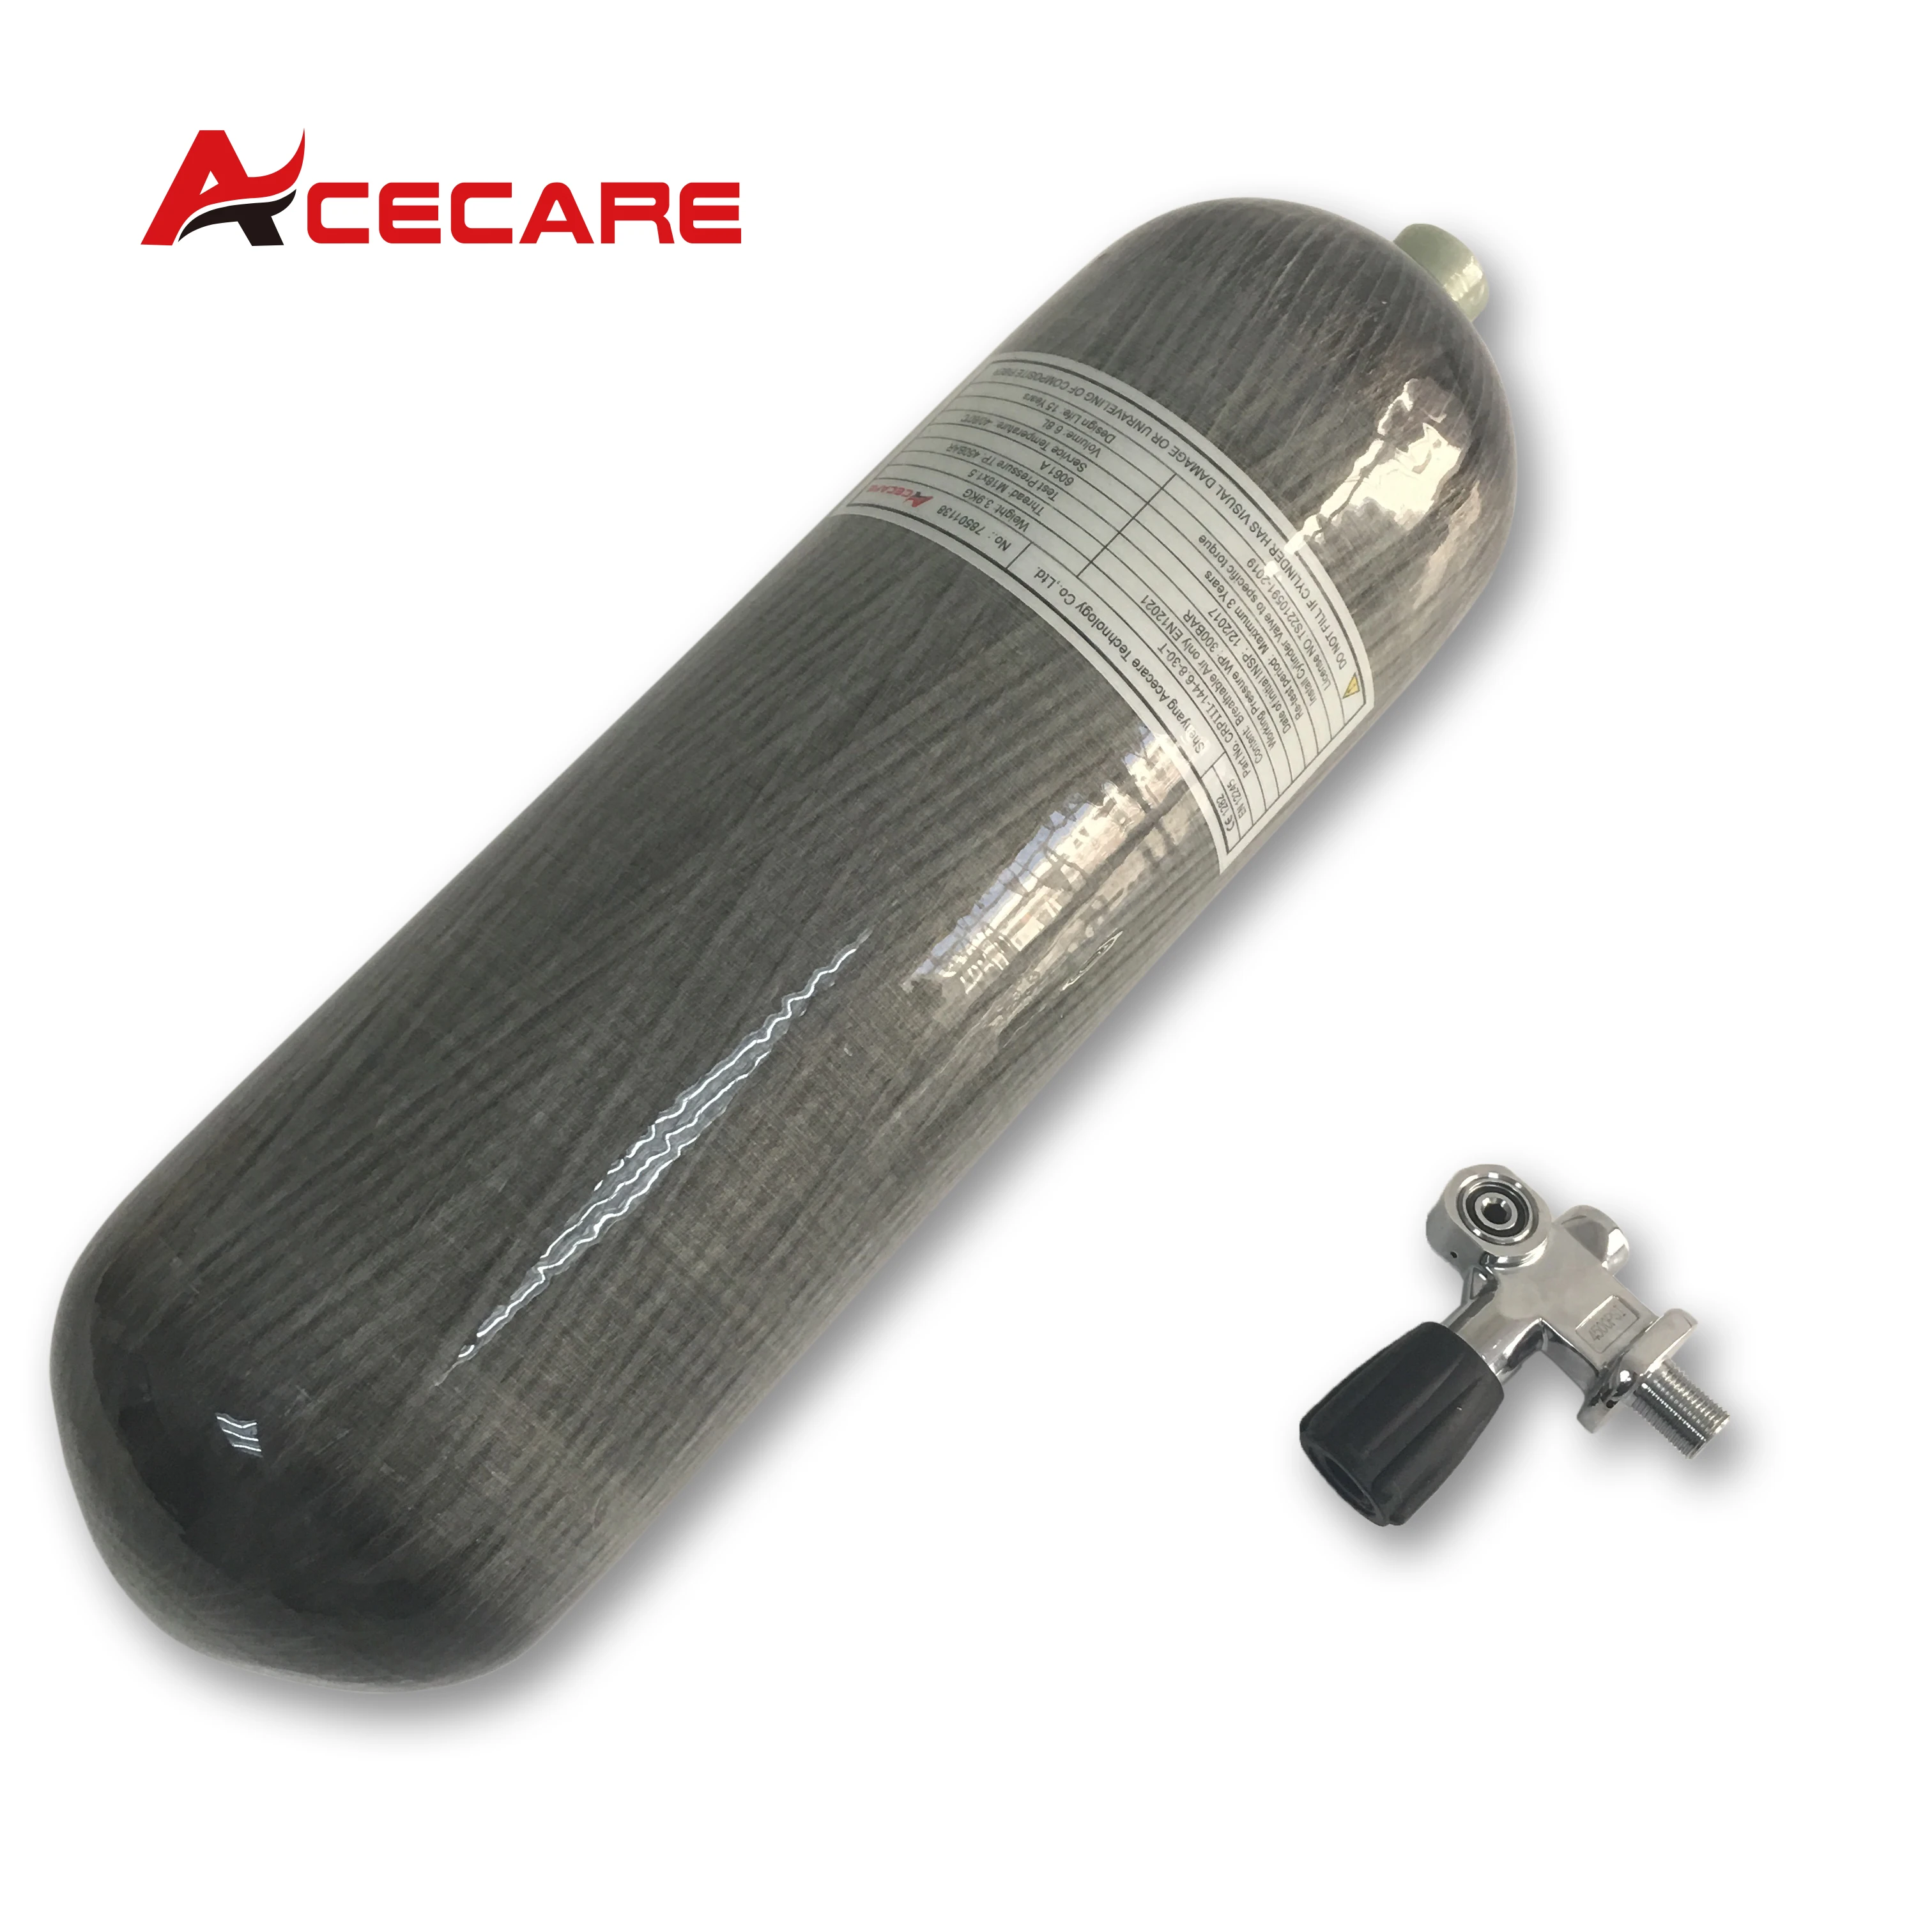 

Acecare hot sale 6.8L 30Mpa CE air compressor high pressure air rifle pcp air receiver tank price with diving valve